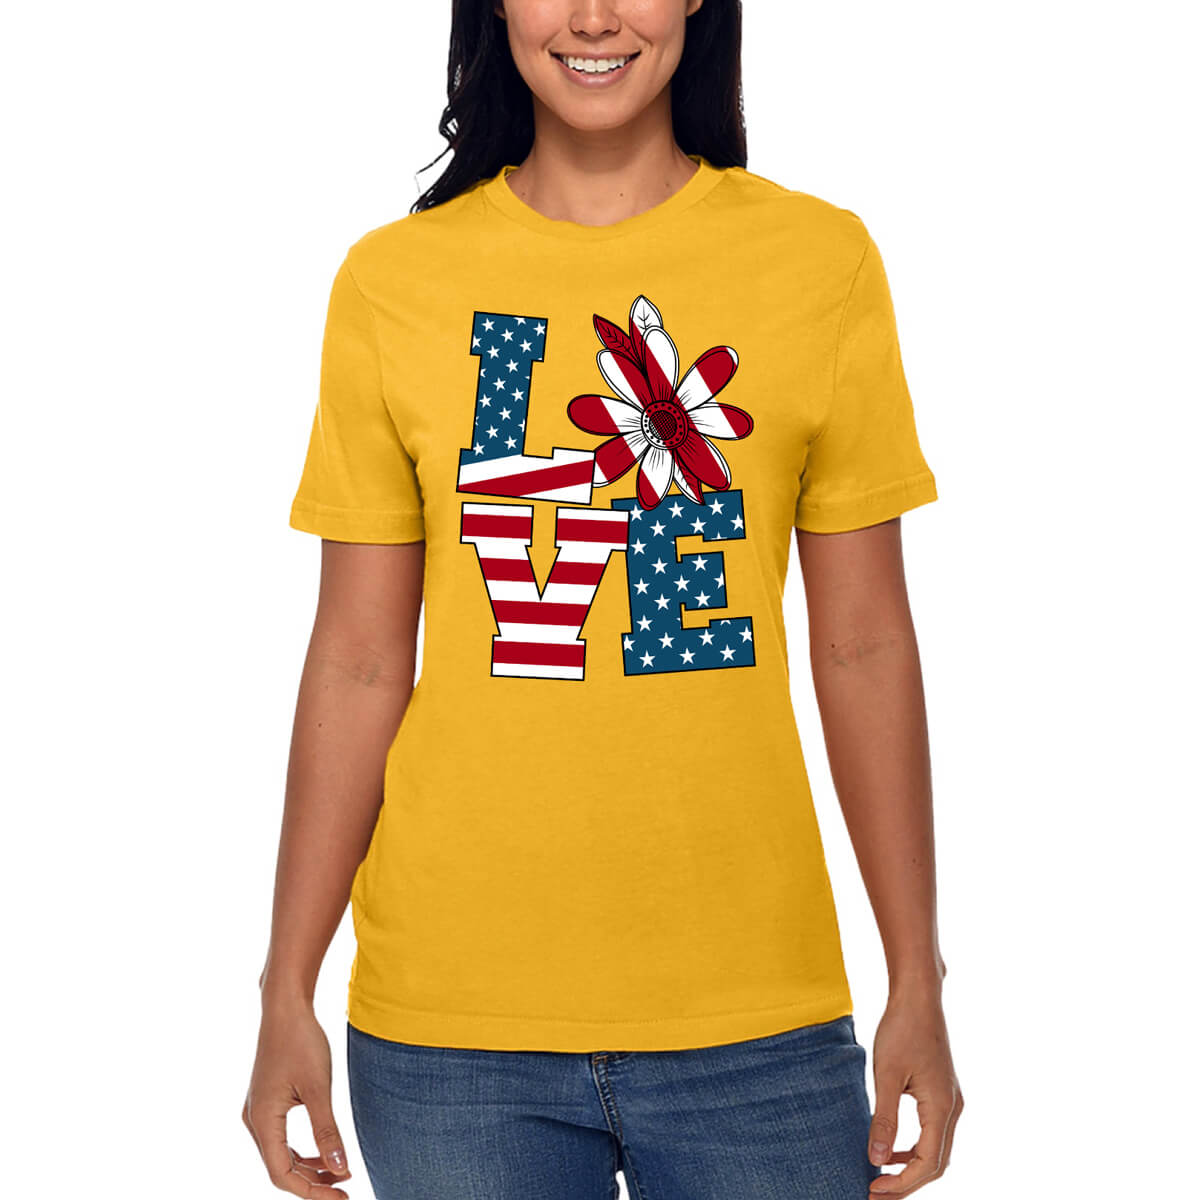 Love Of Country T Shirt